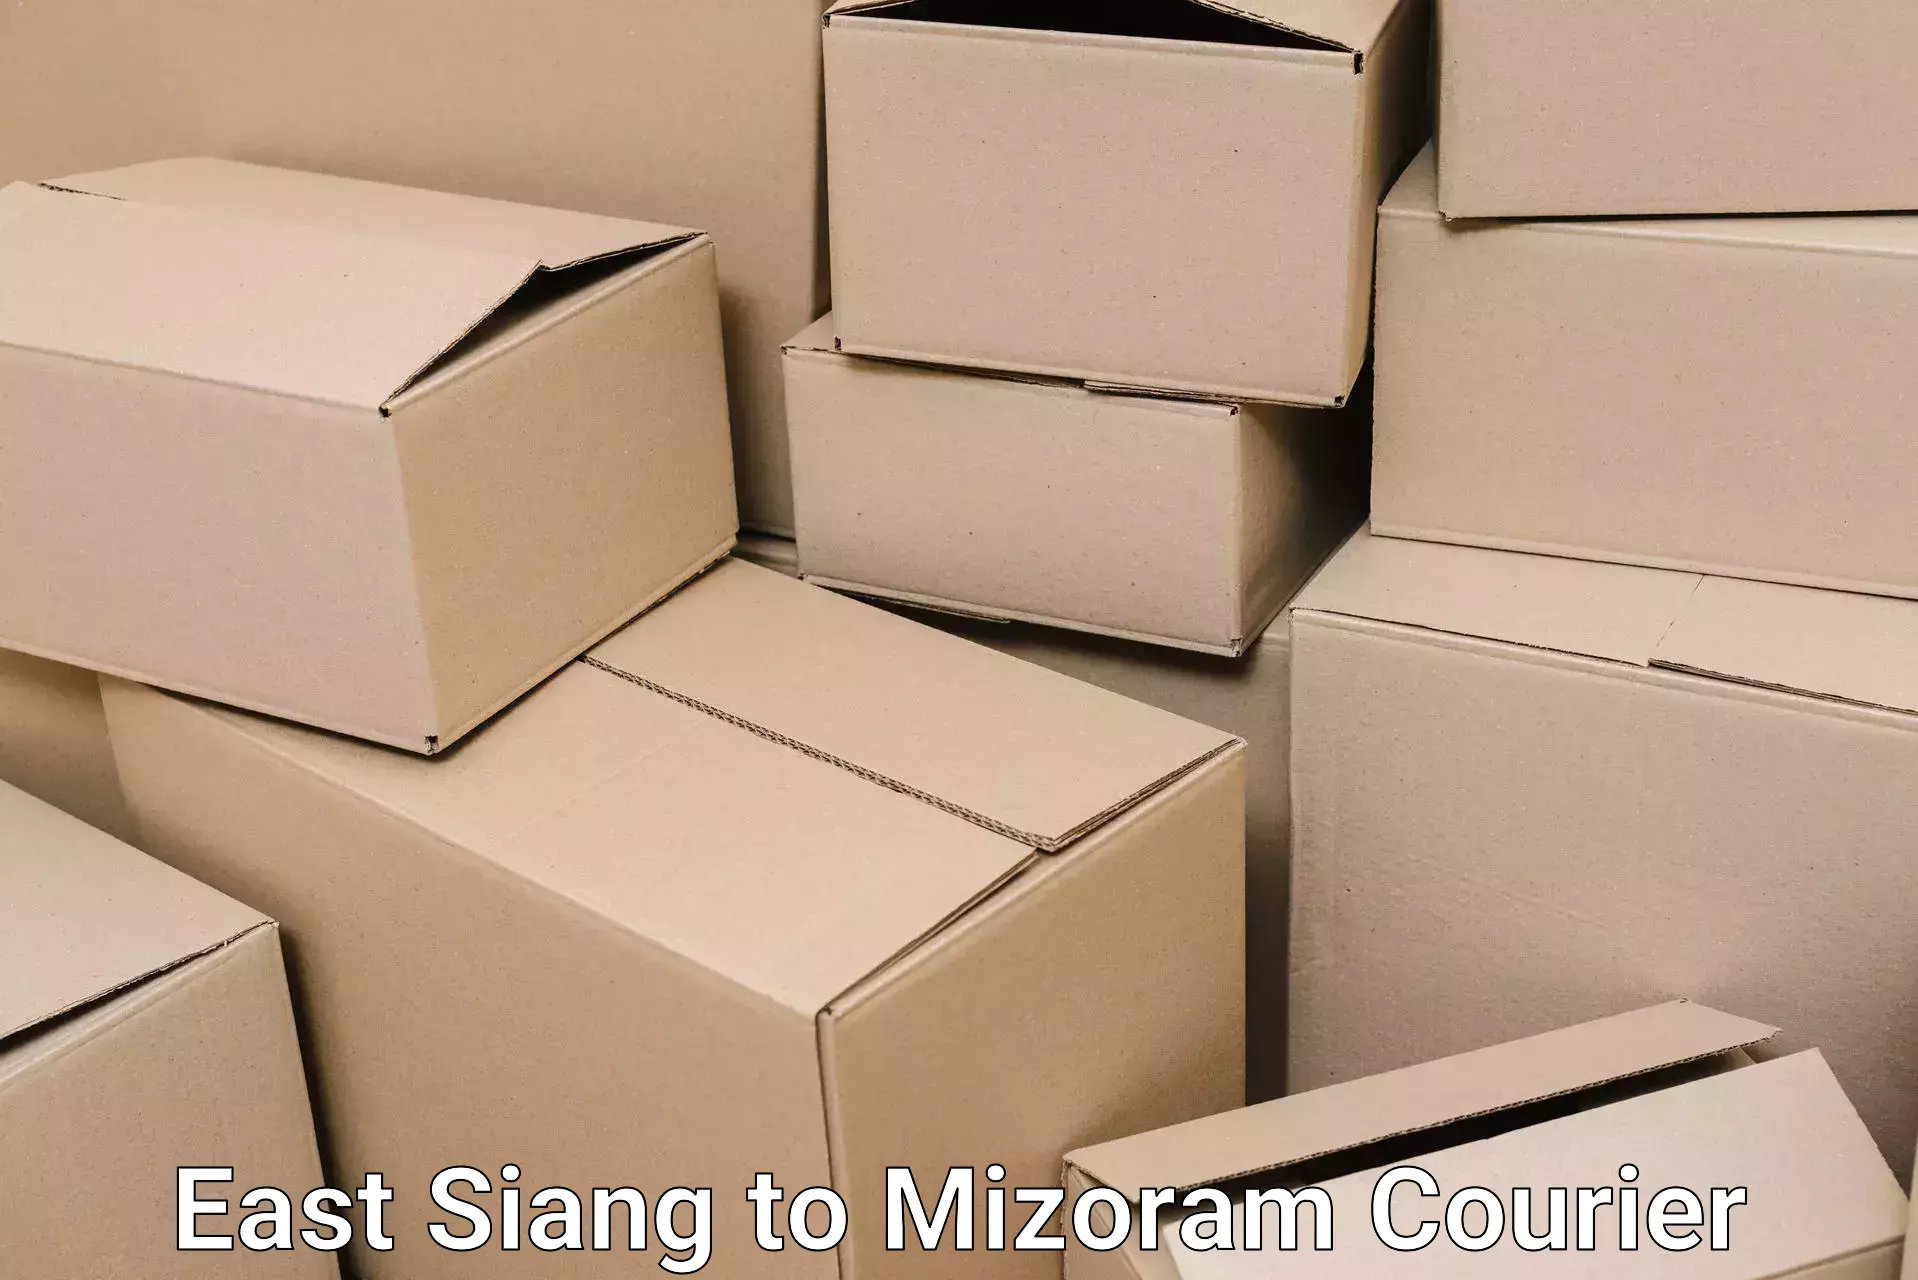 Trusted moving company East Siang to Mizoram